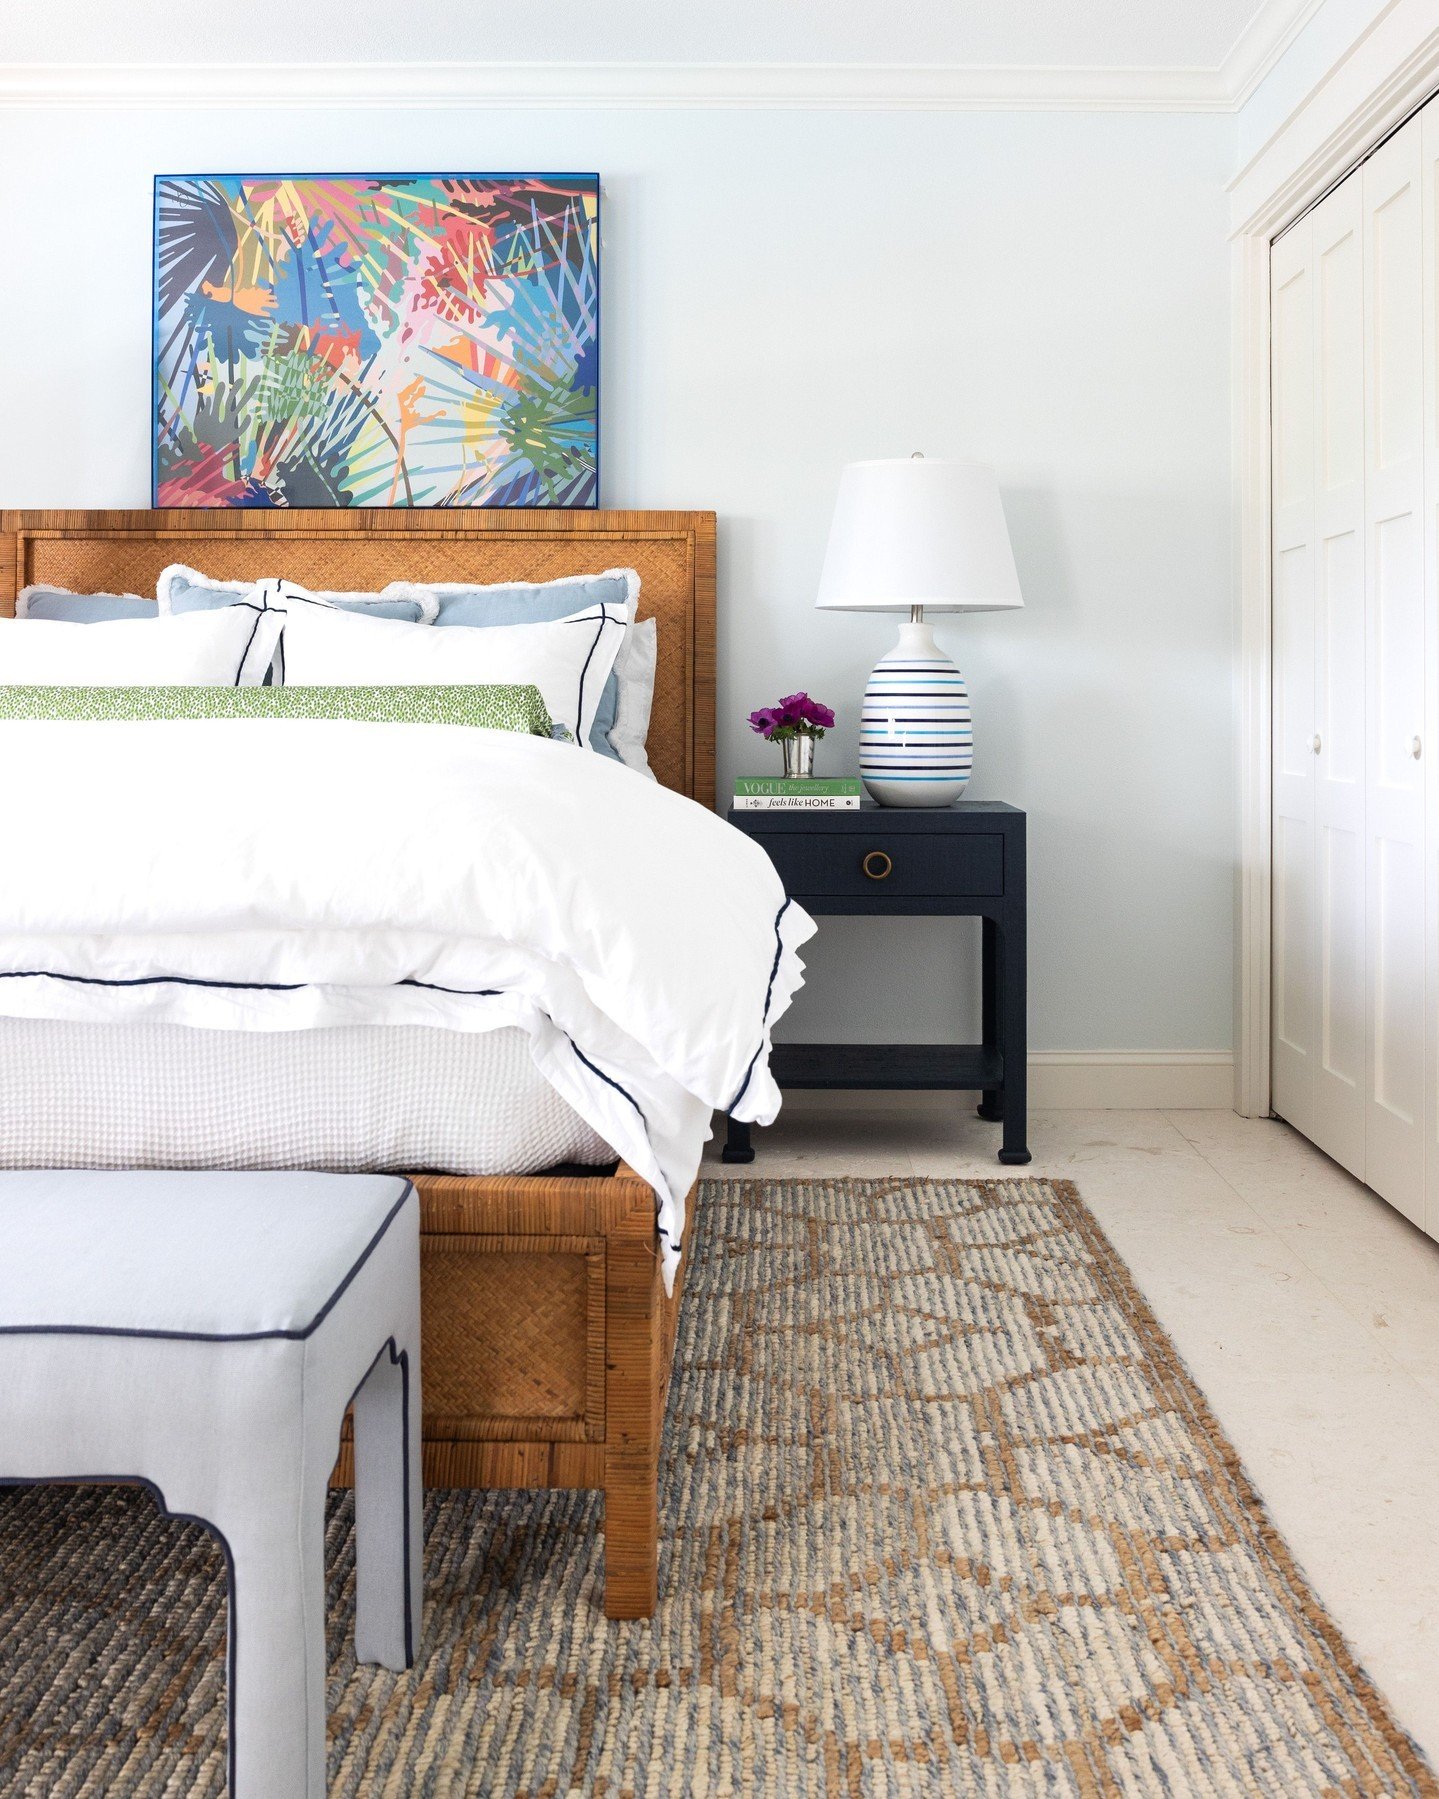 Designing coastal cozy bedrooms? It's my seaside soul's true calling! 🐚✨So many dreamy details in this bedroom, from the rattan bed to the navy grasscloth accent pieces to the breezy blue hues.  Its the perfect tranquil sanctuary. 🛏️💙
.
.
.
.
 
#V